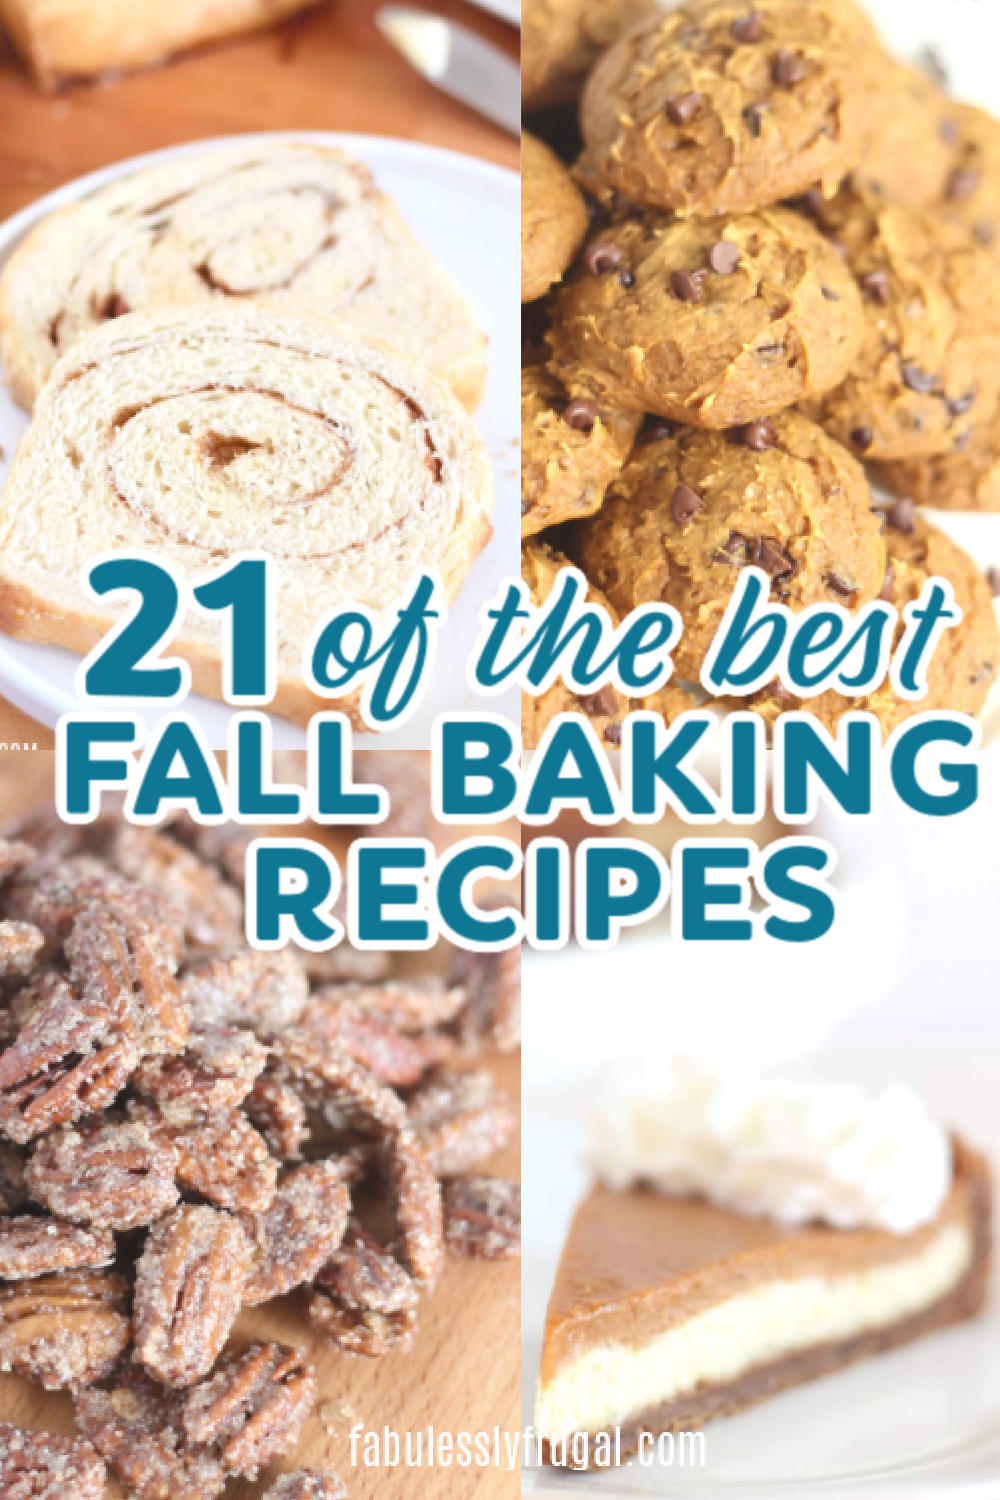 21 fall baking recipes you'll die for!